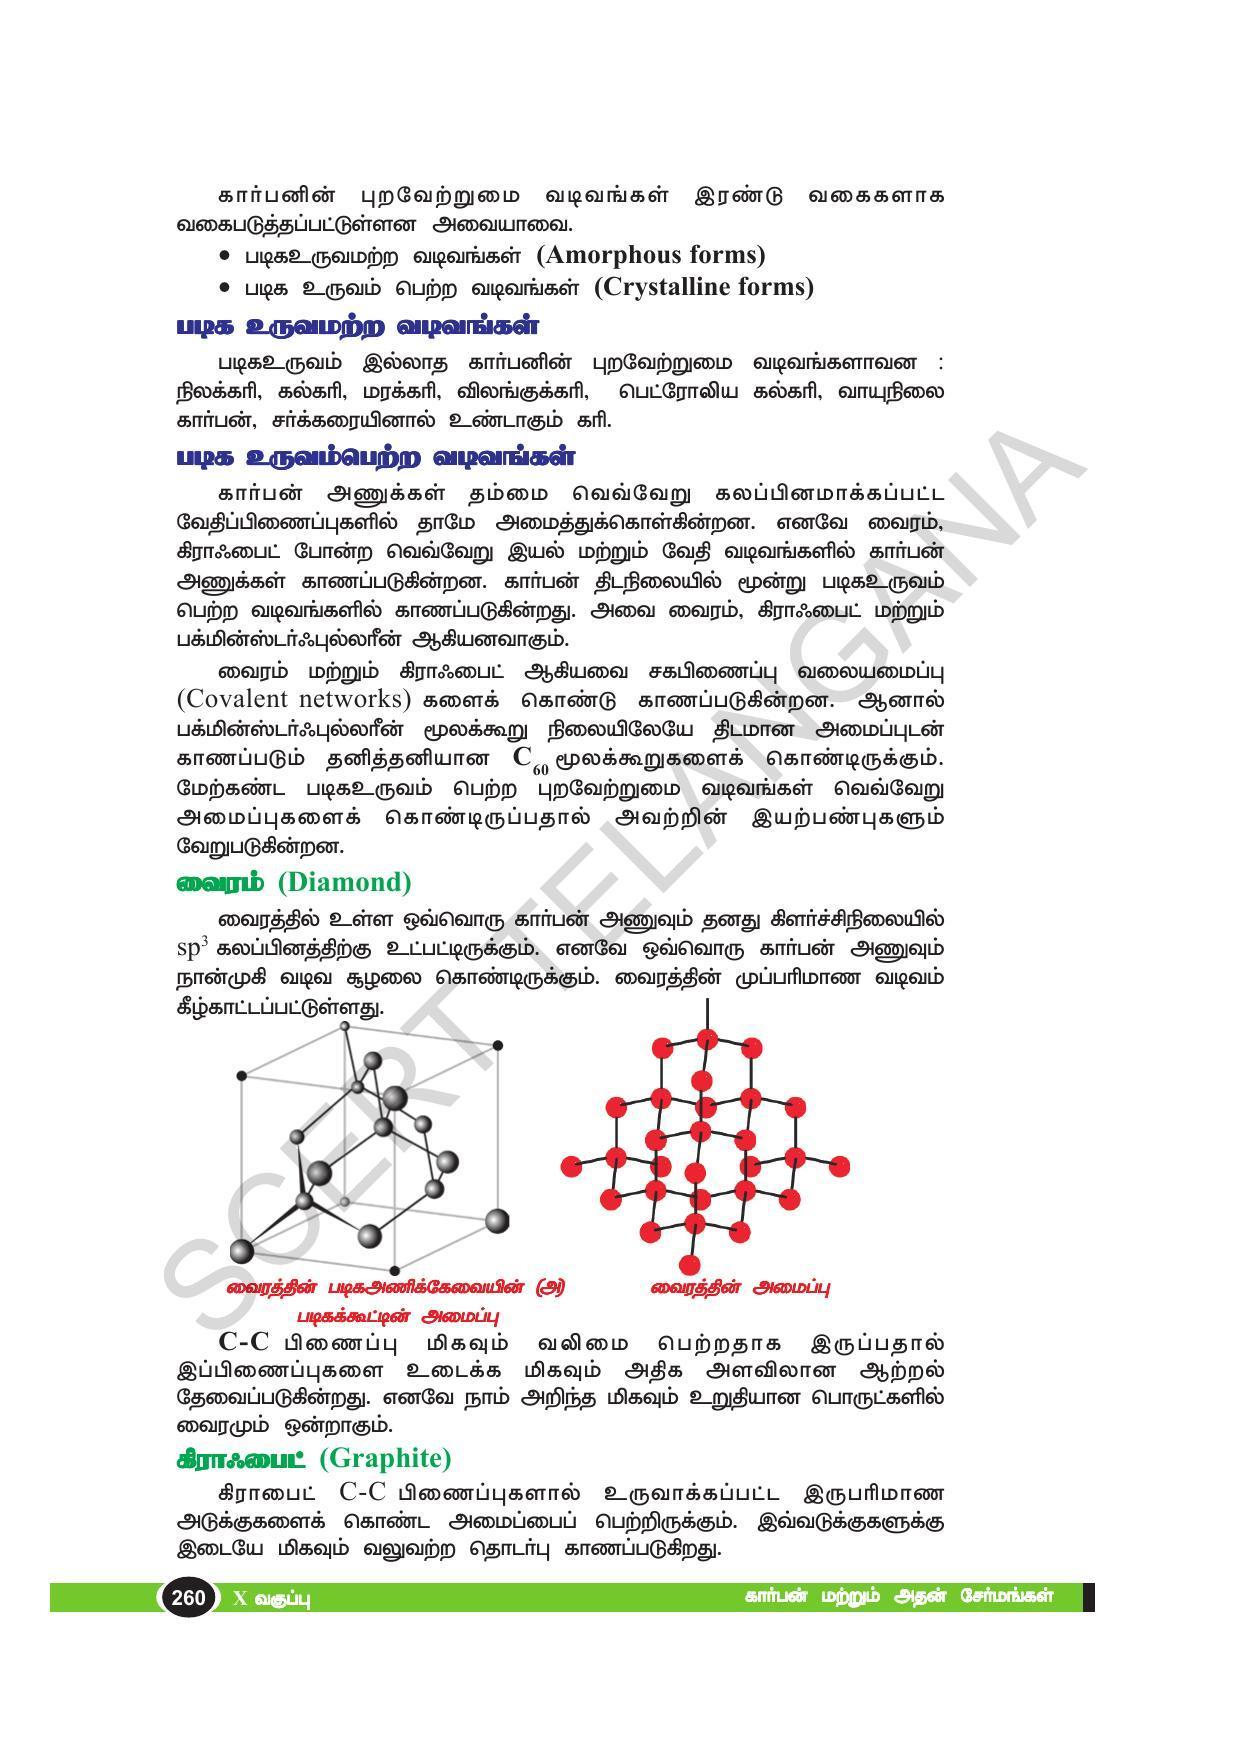 TS SCERT Class 10 Physical Science(Tamil Medium) Text Book - Page 272